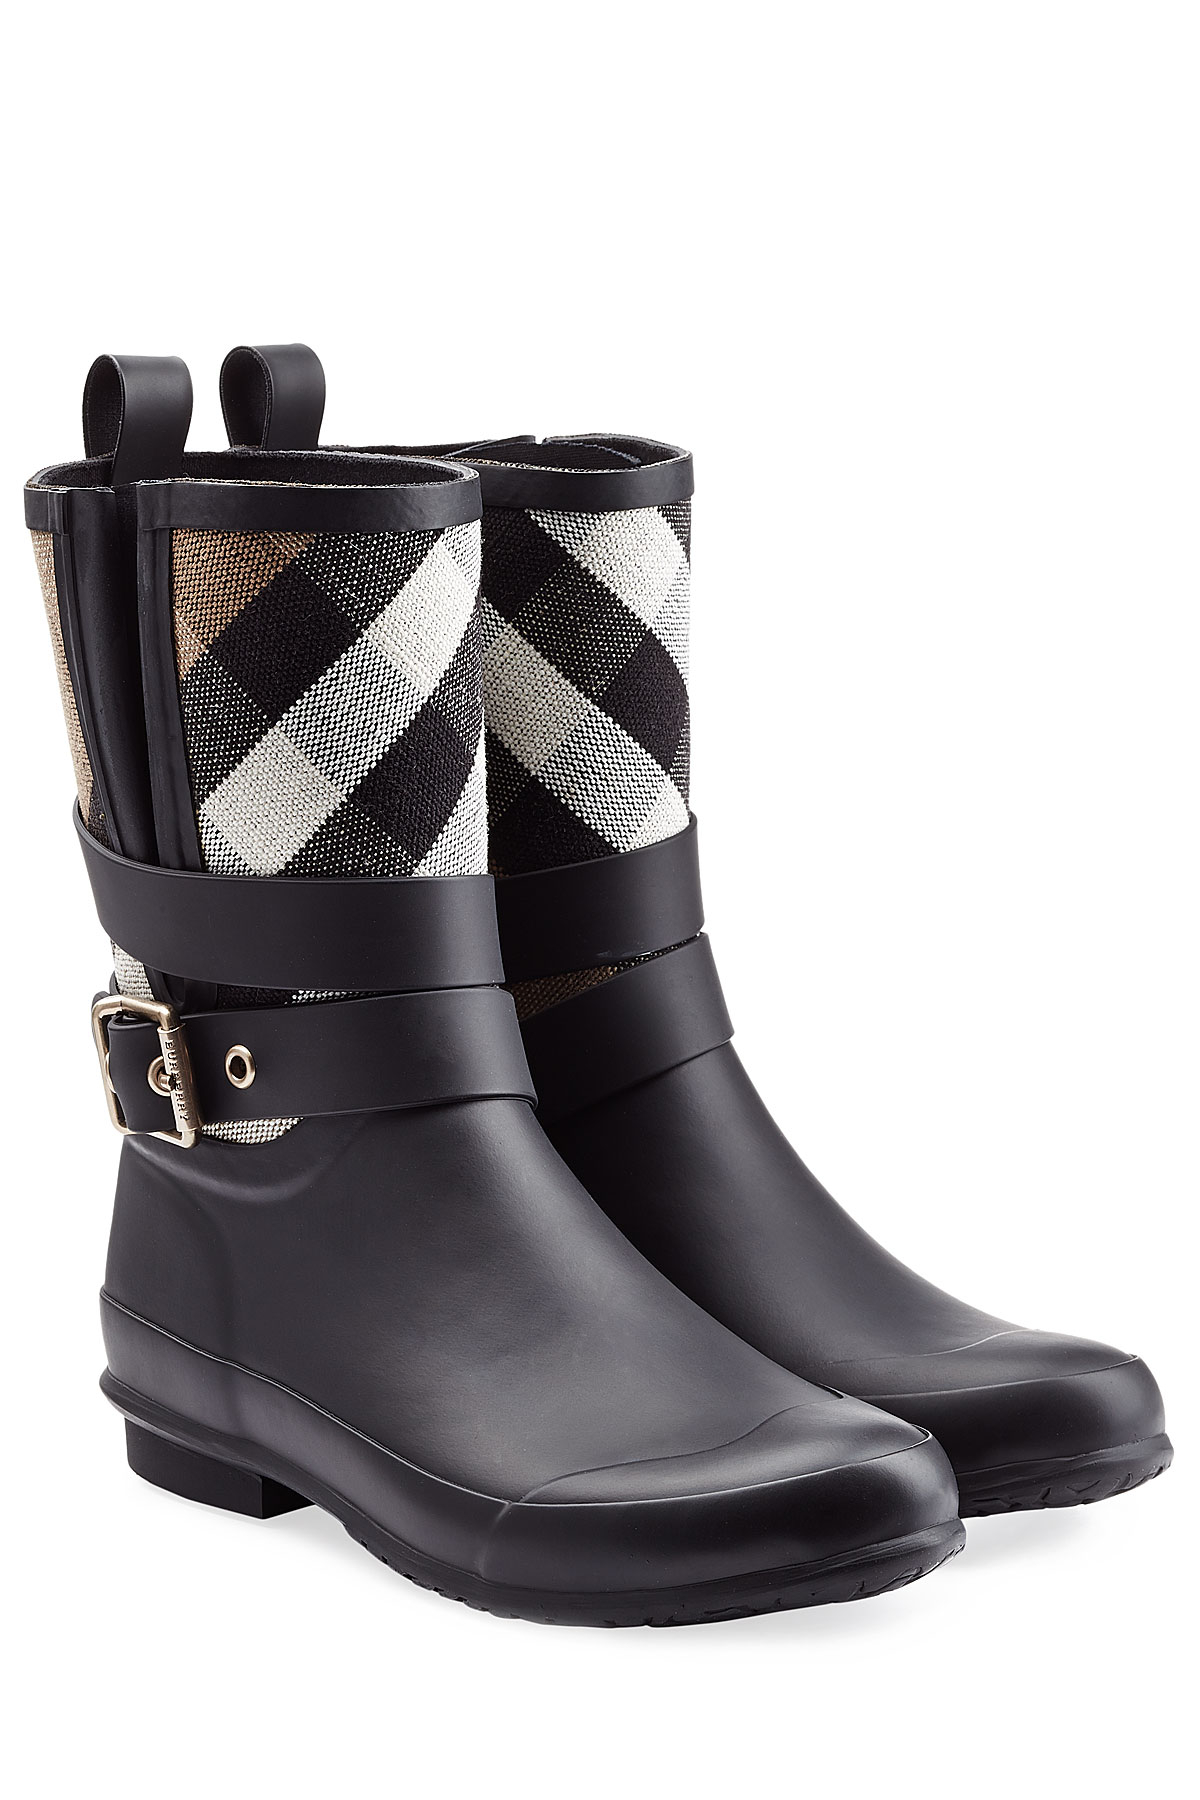 Lyst - Burberry Holloway Rubber Rain Boots - Black in Black